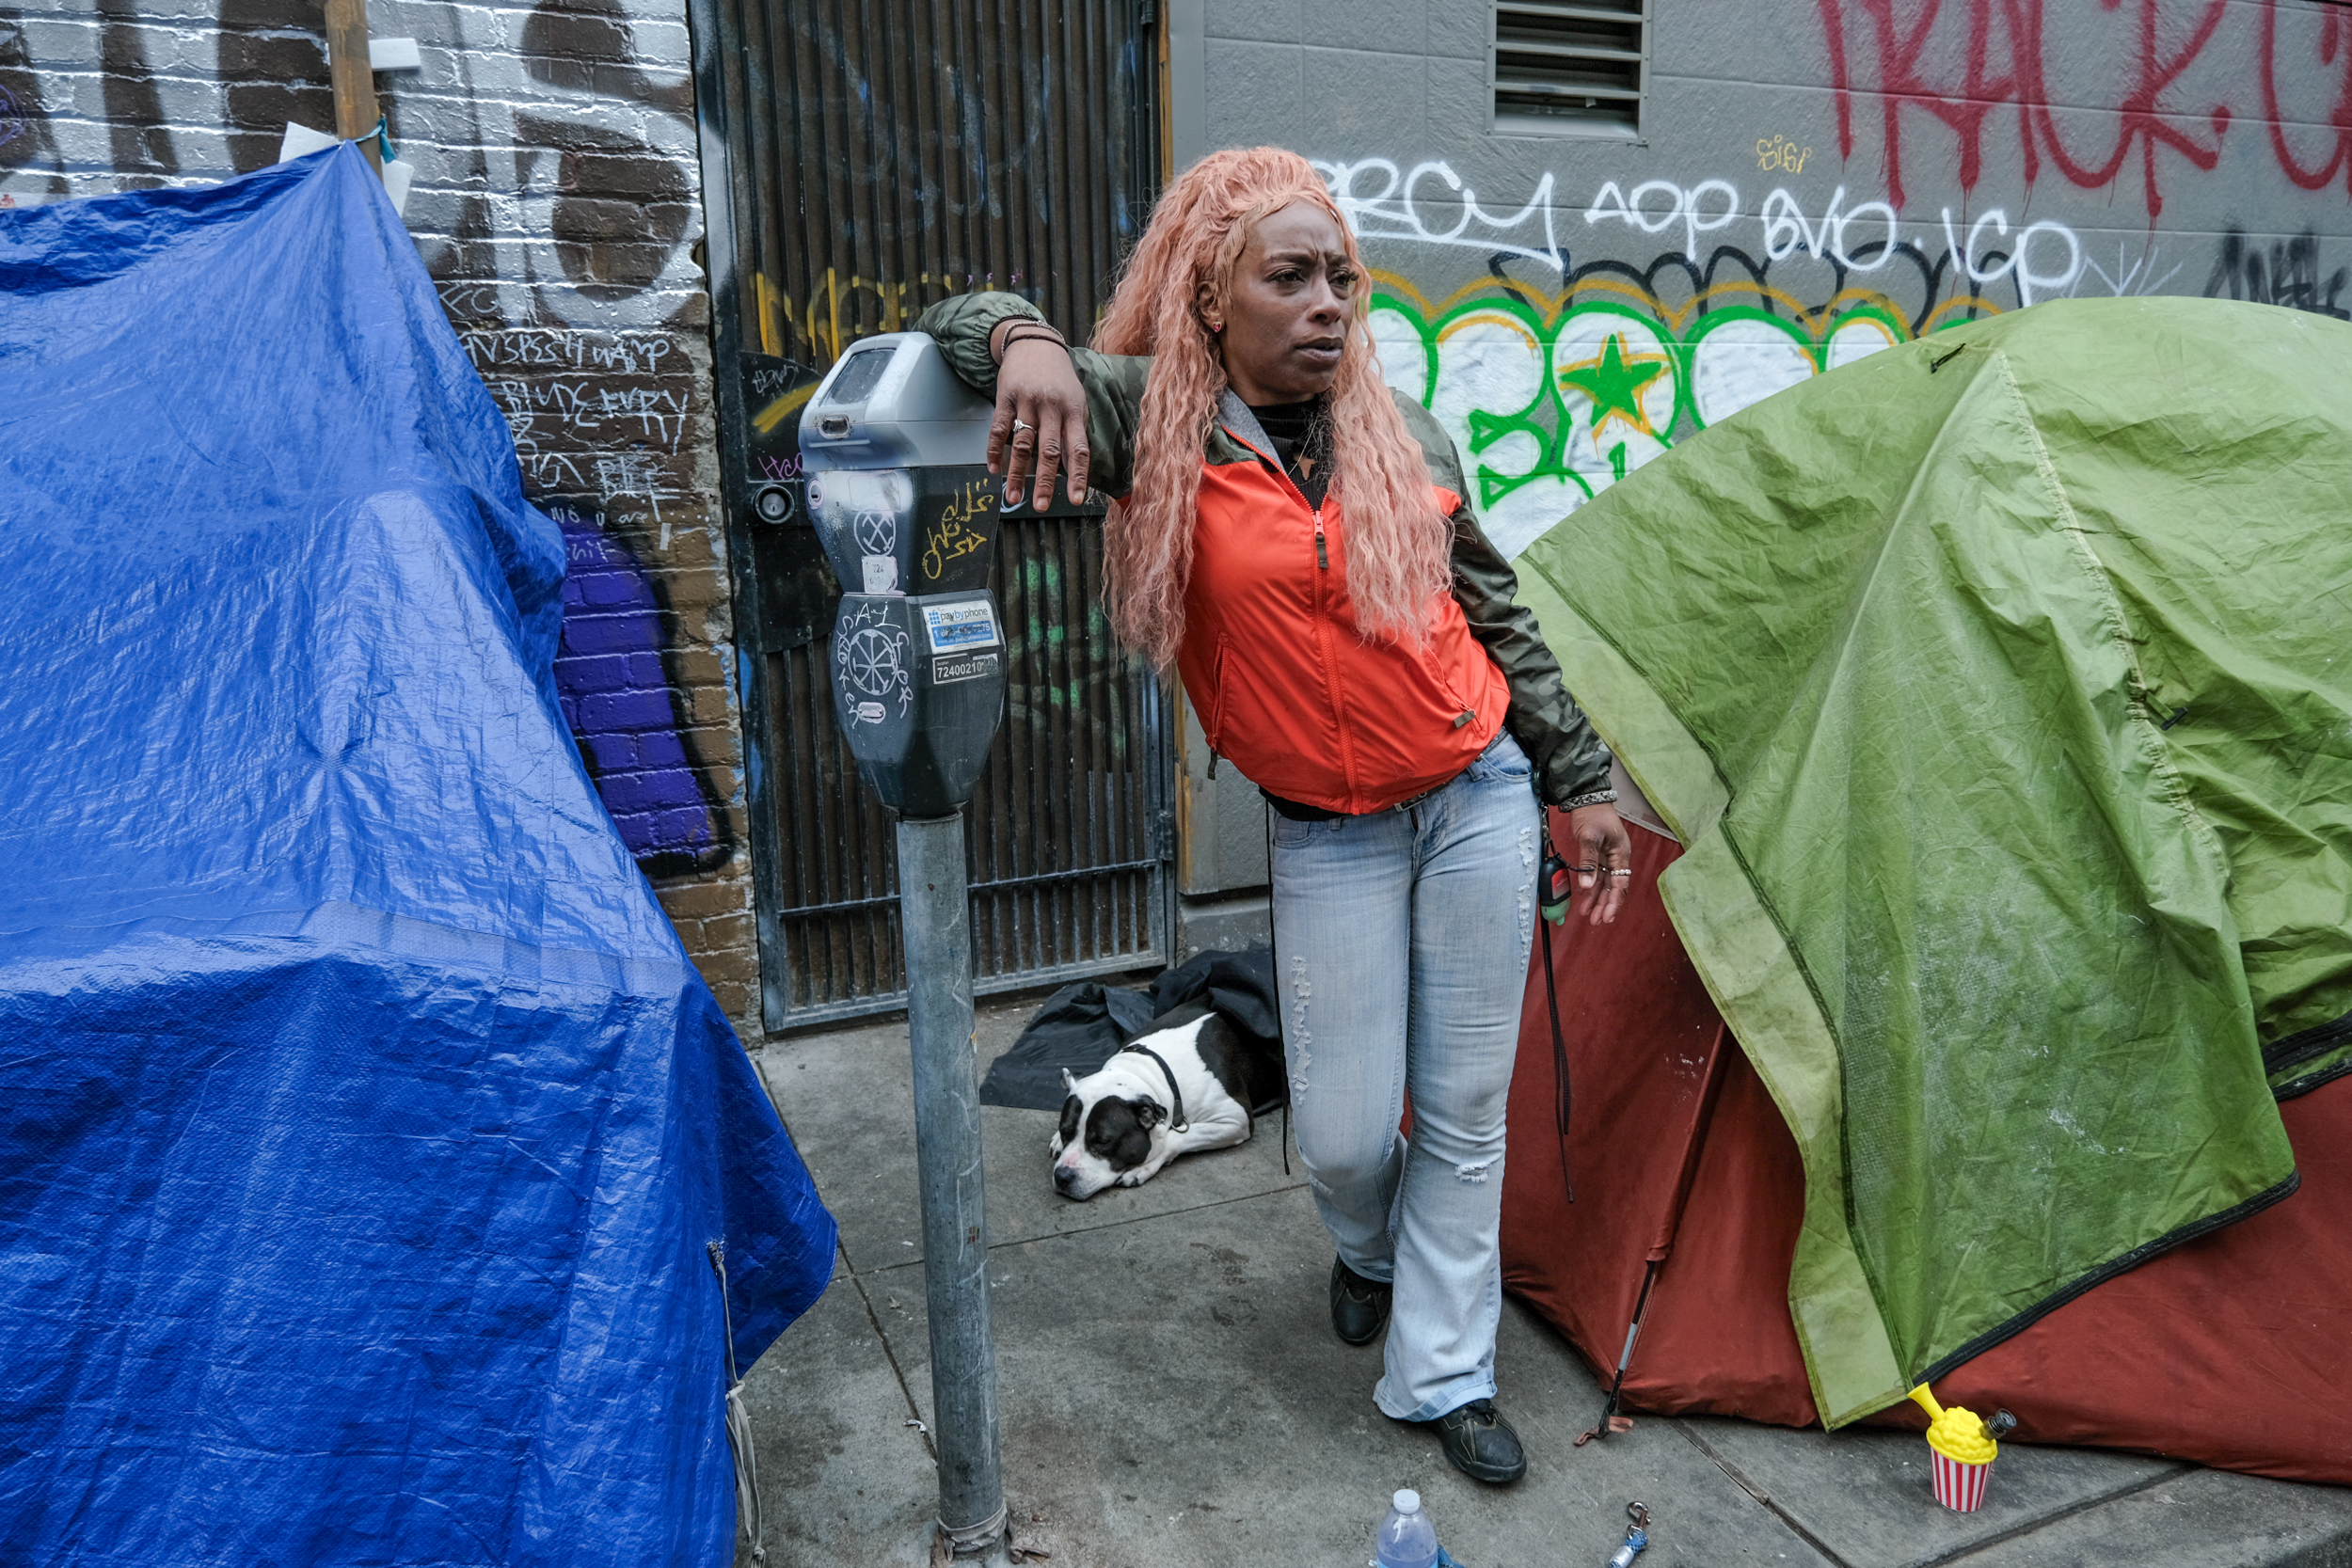 A person stands near tents and a dog on an urban sidewalk with graffiti in the background.